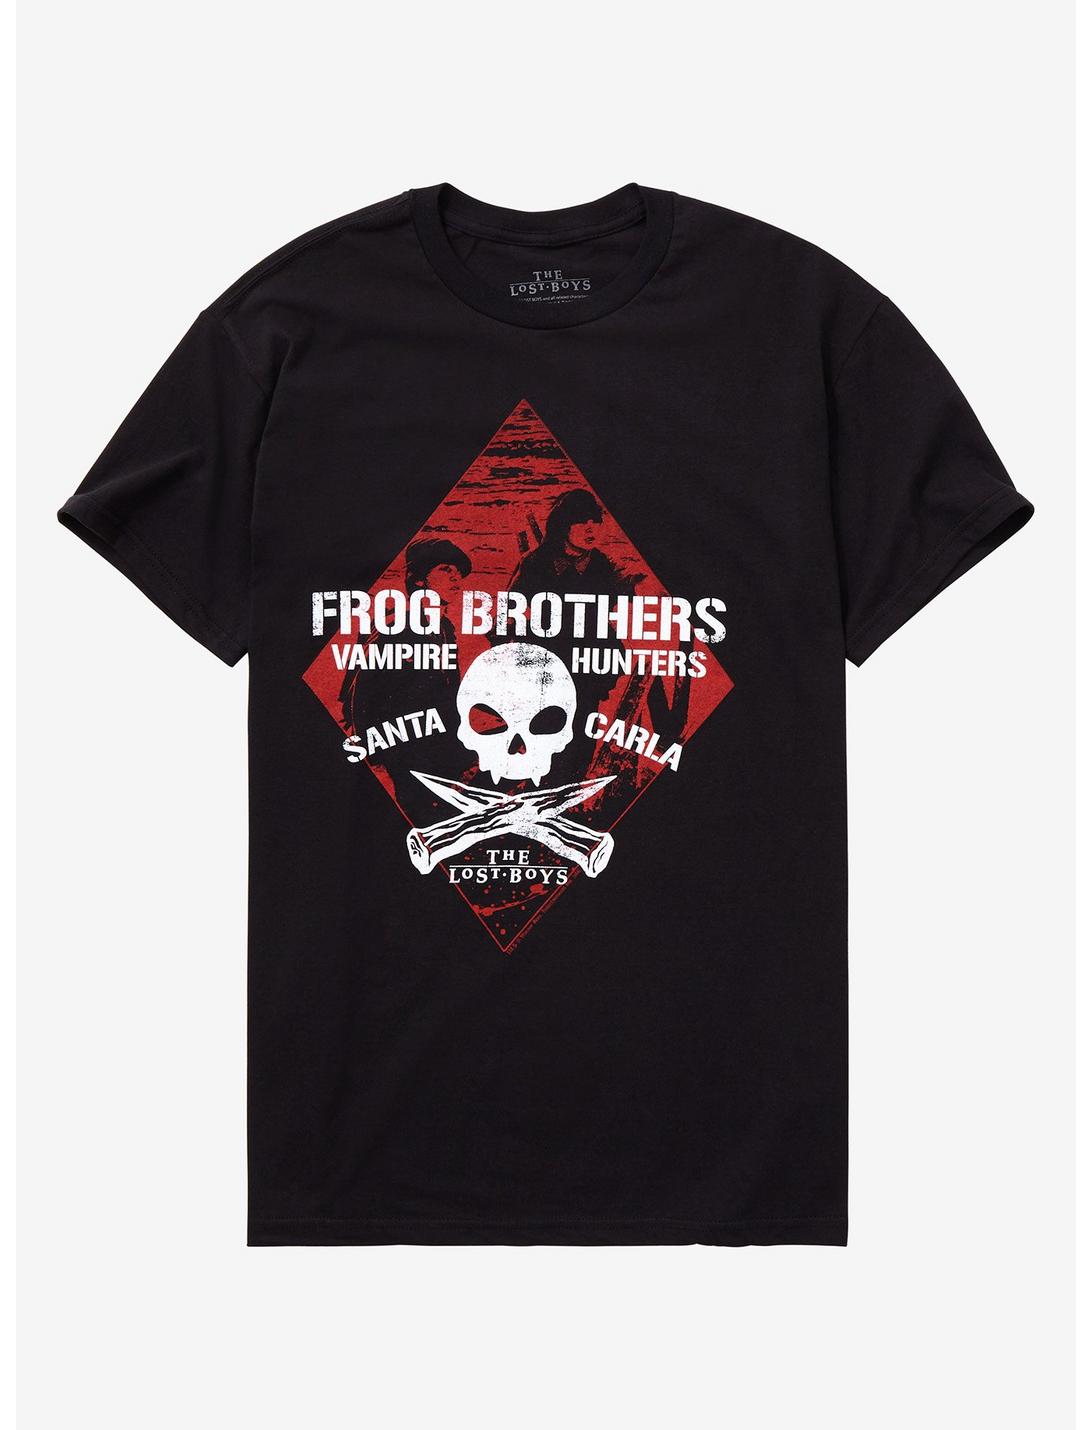 The Lost Boys Frog Brothers T-Shirt, BLACK, hi-res